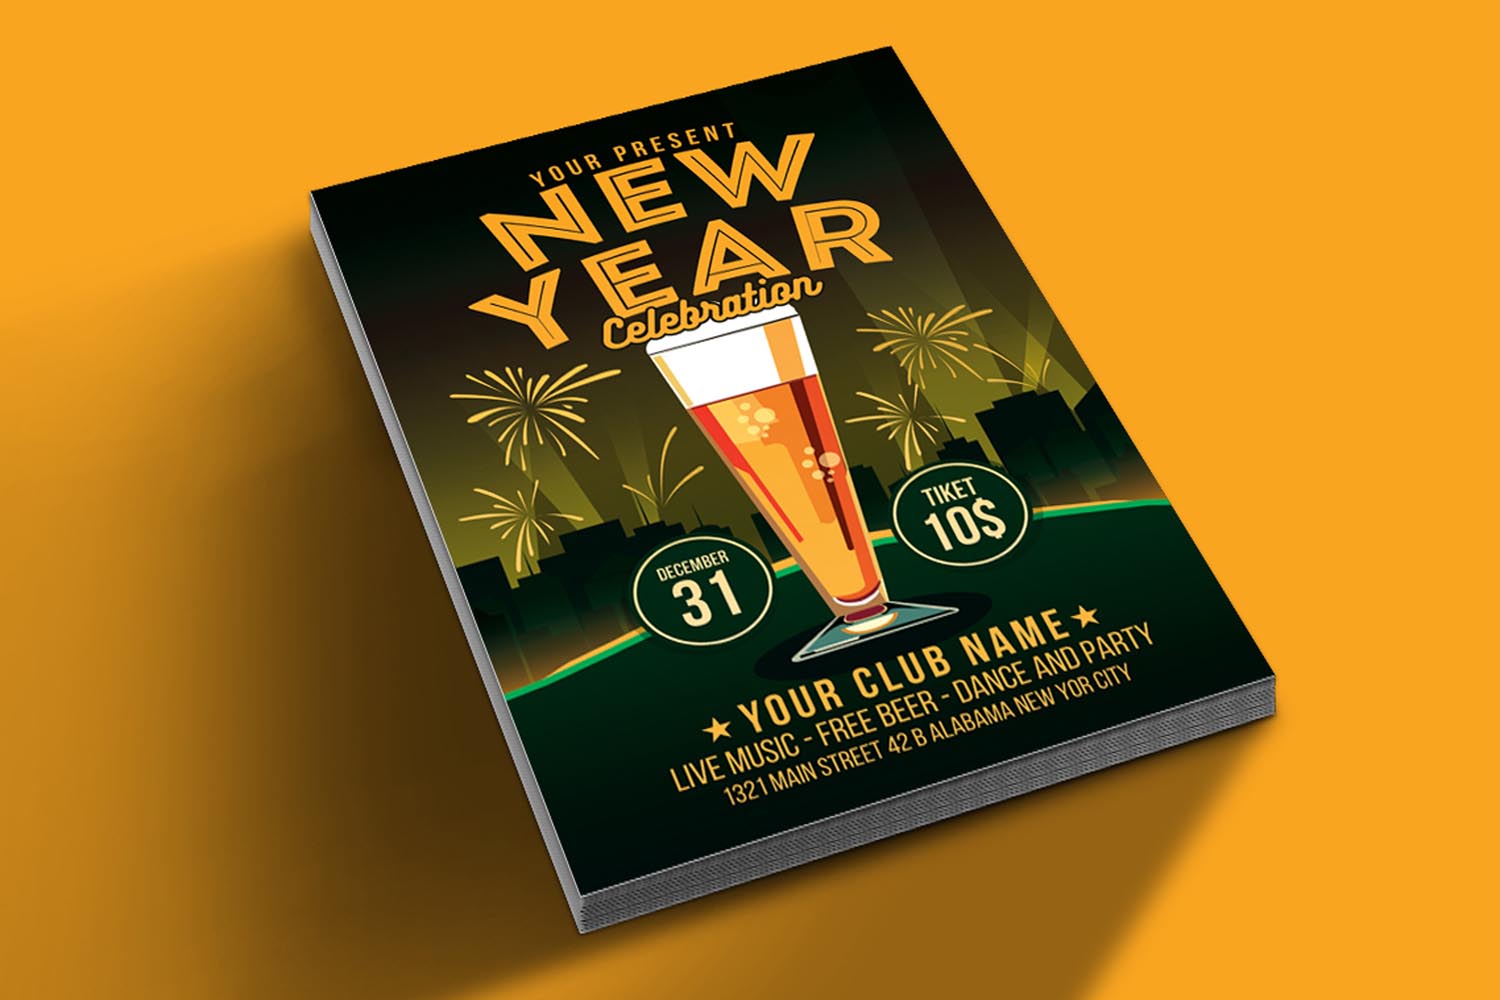 New Year Celebration Beer Party - Corporate Identity Template